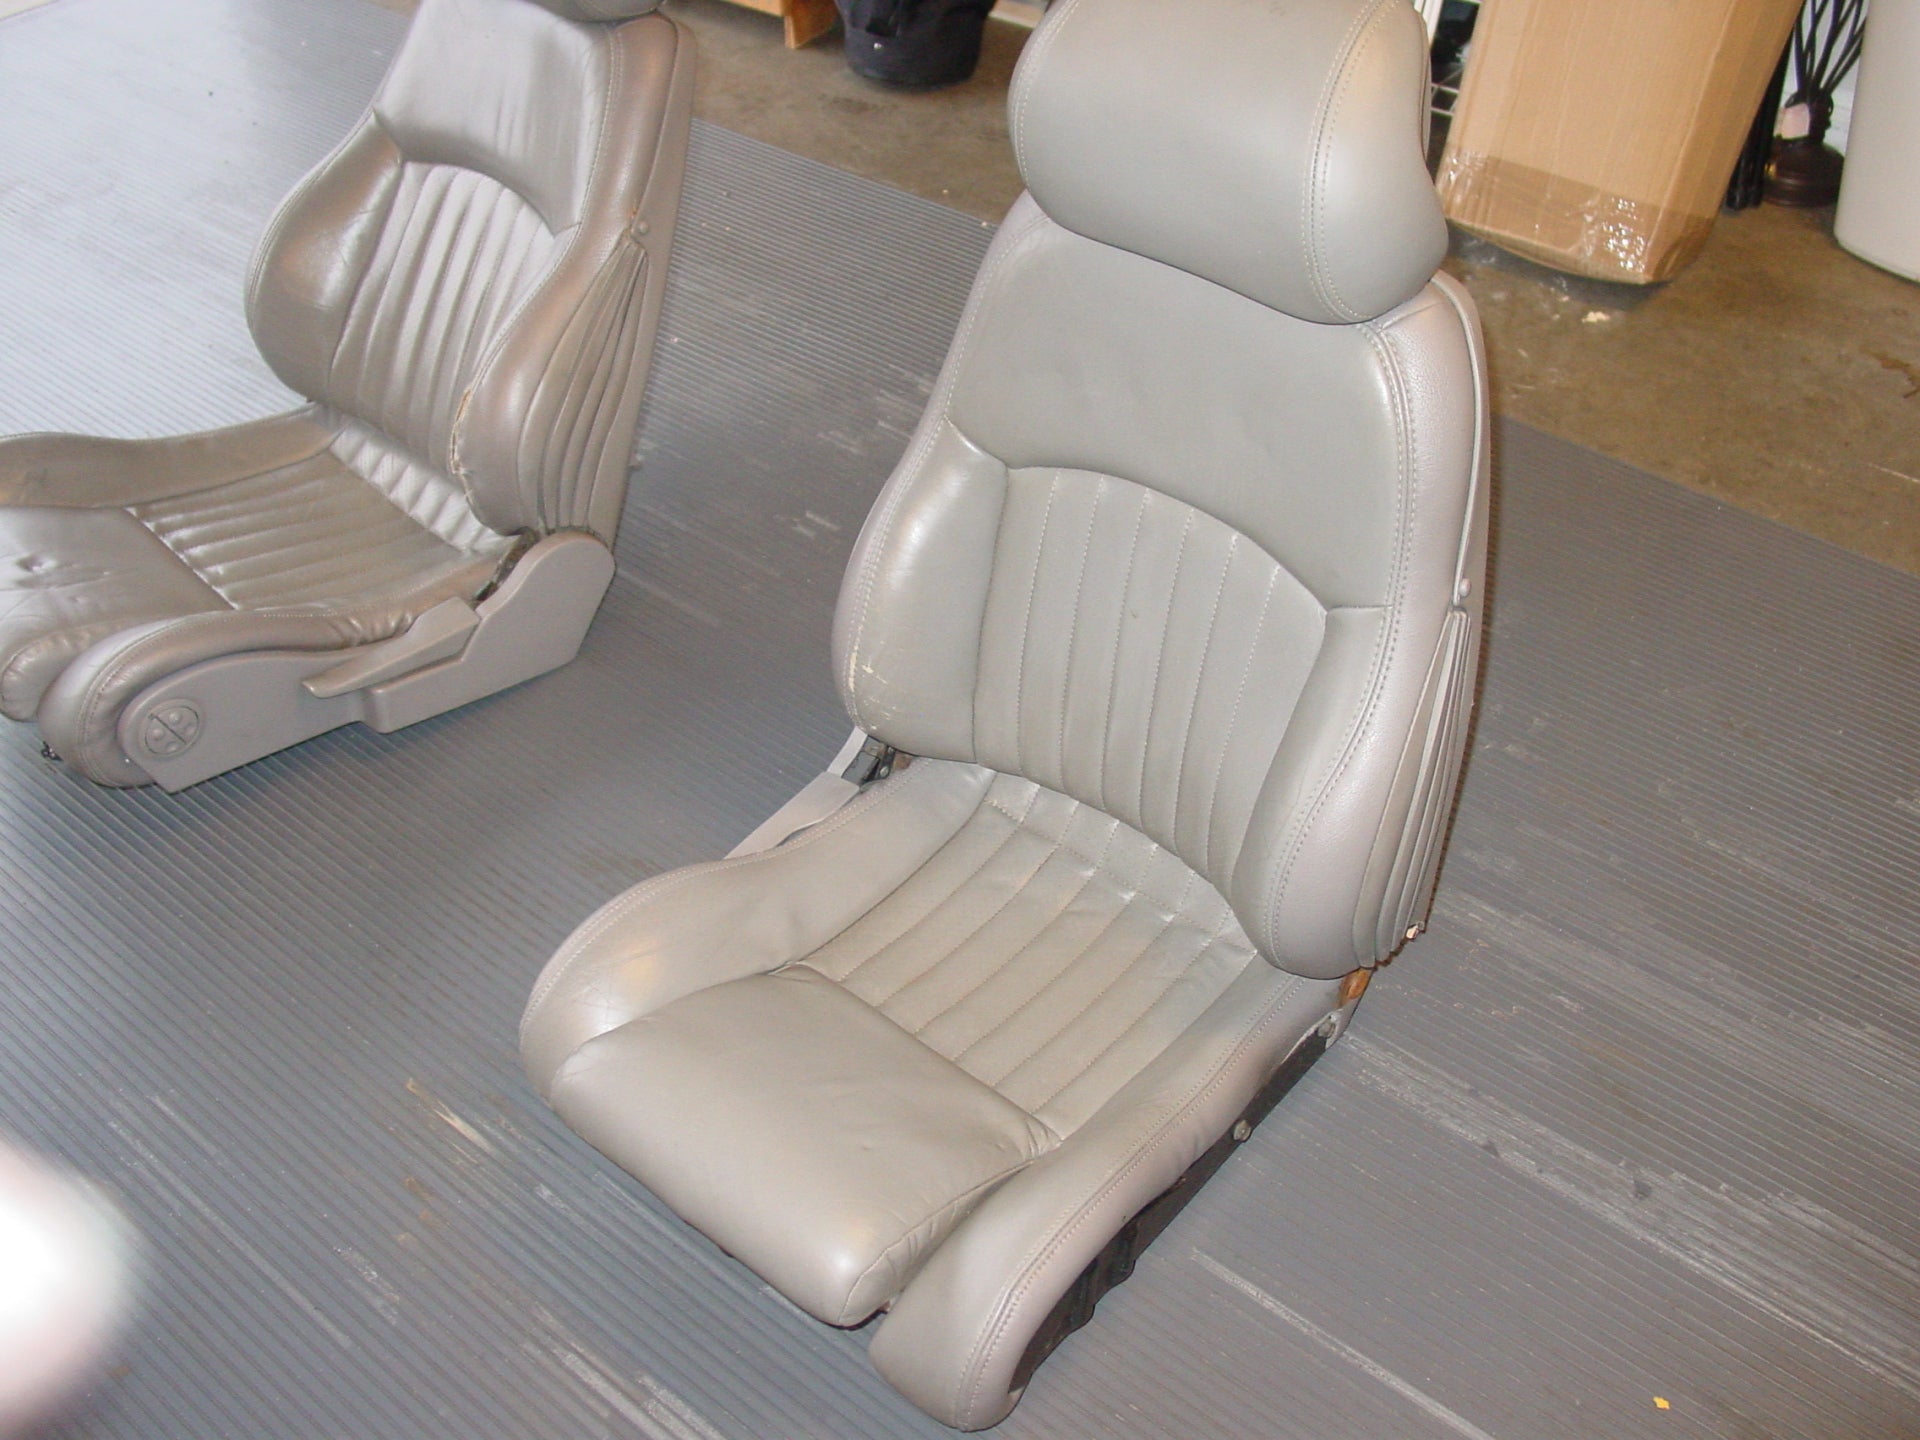 Bentley leather repair dye full interior large kit. - The Leather Colour  Doctor